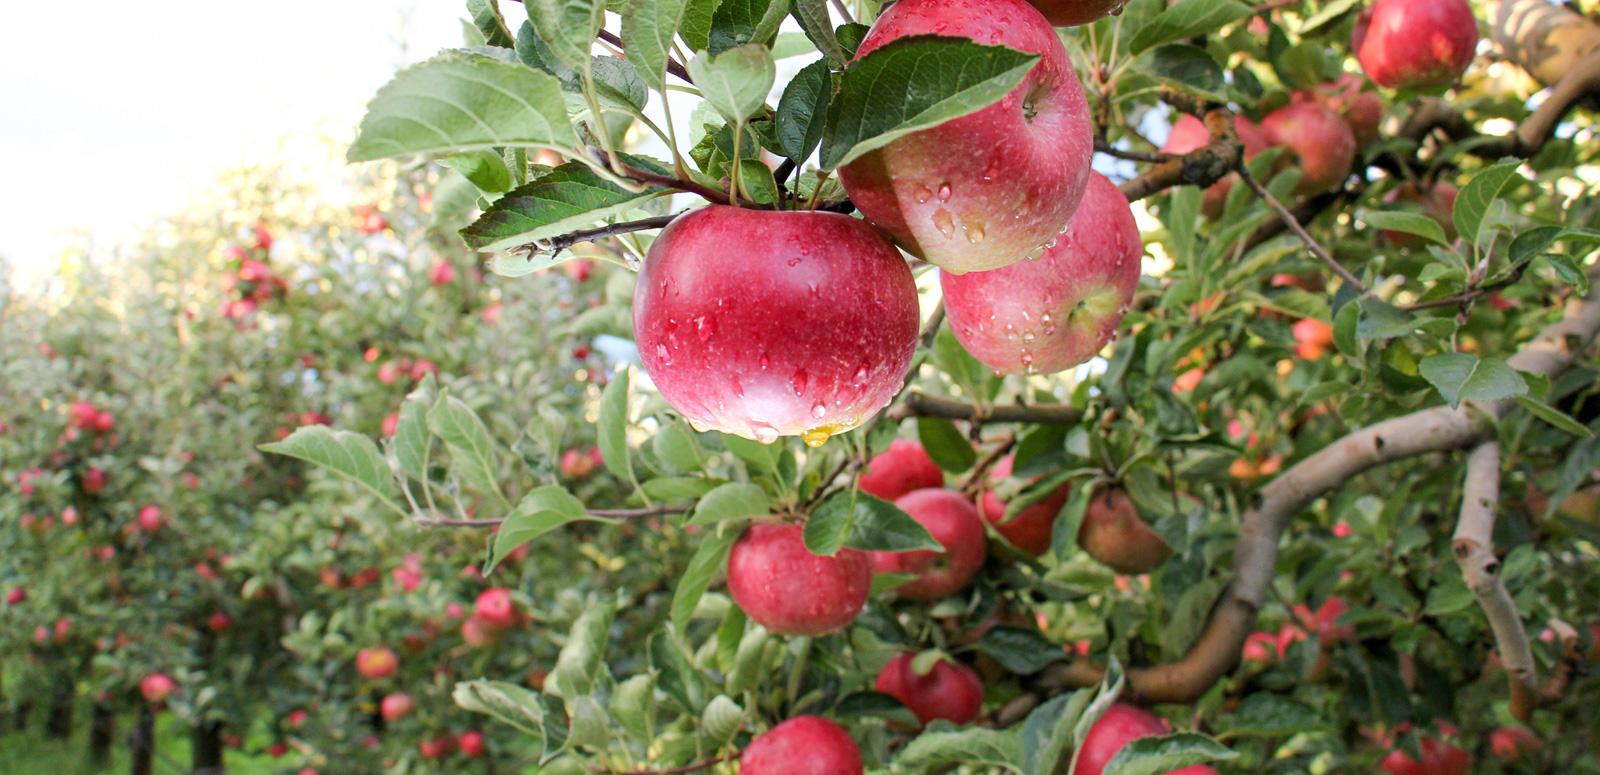 Close up of some apples on a tree in an apple orchard